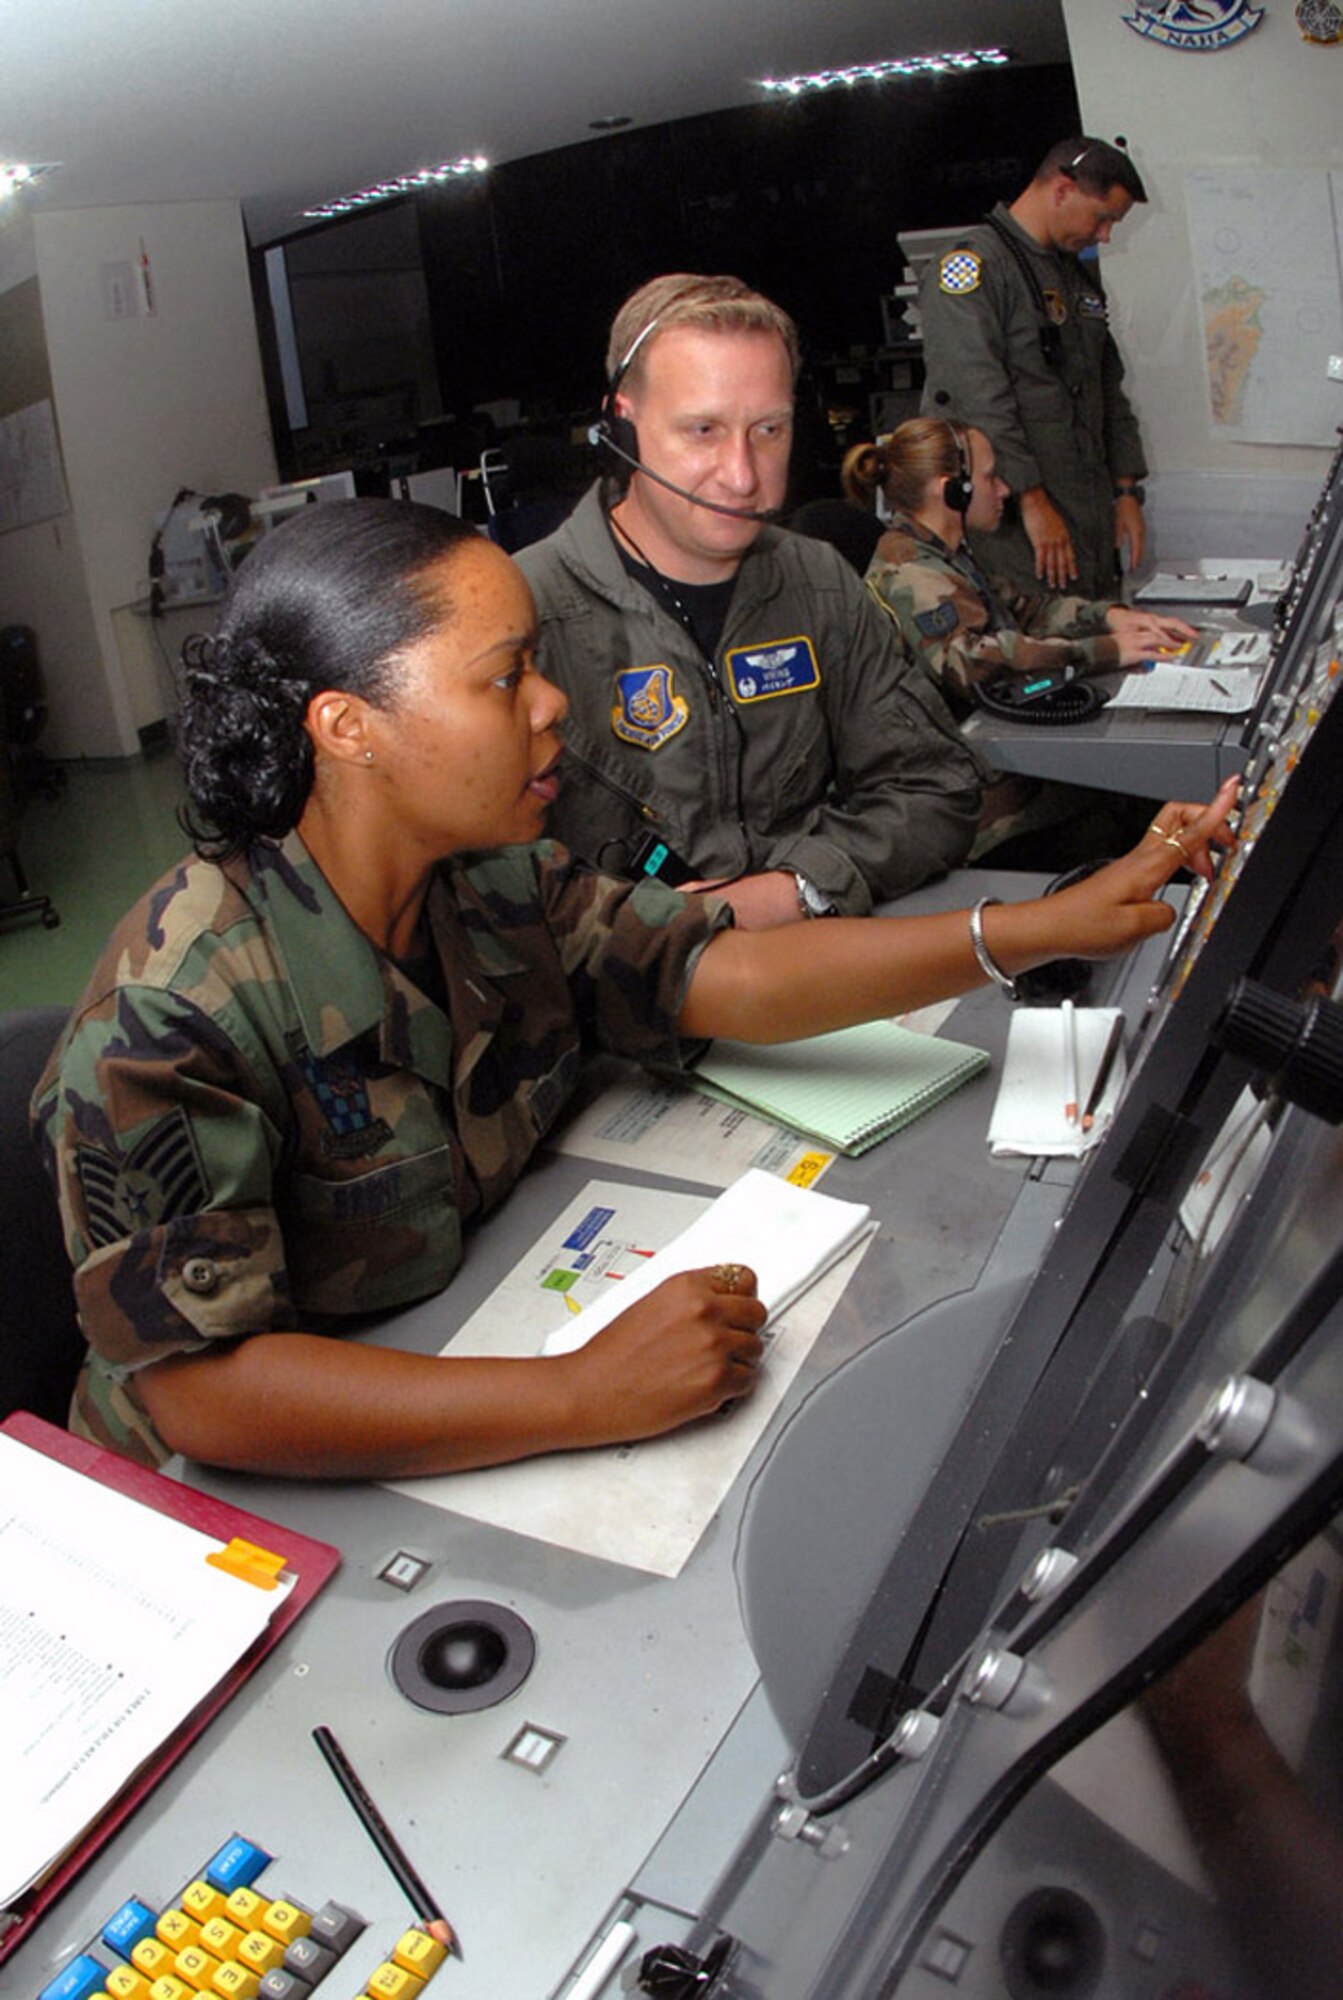 Tech. Sgt. Connie Brent and Maj. Charles Dennison control a large force exercise using the Base Air Defense Ground Environment system at Naha Air Base, Japan. Sergeant Brent relays time-sensitive information to Major Dennison, the mission crew commander, who controls the air space by guiding aircraft into different sections according to the mission plan. They are assigned to the 623rd Air Control Flight. (U.S. Air Force photo/Staff Sgt. Steven Nabor)